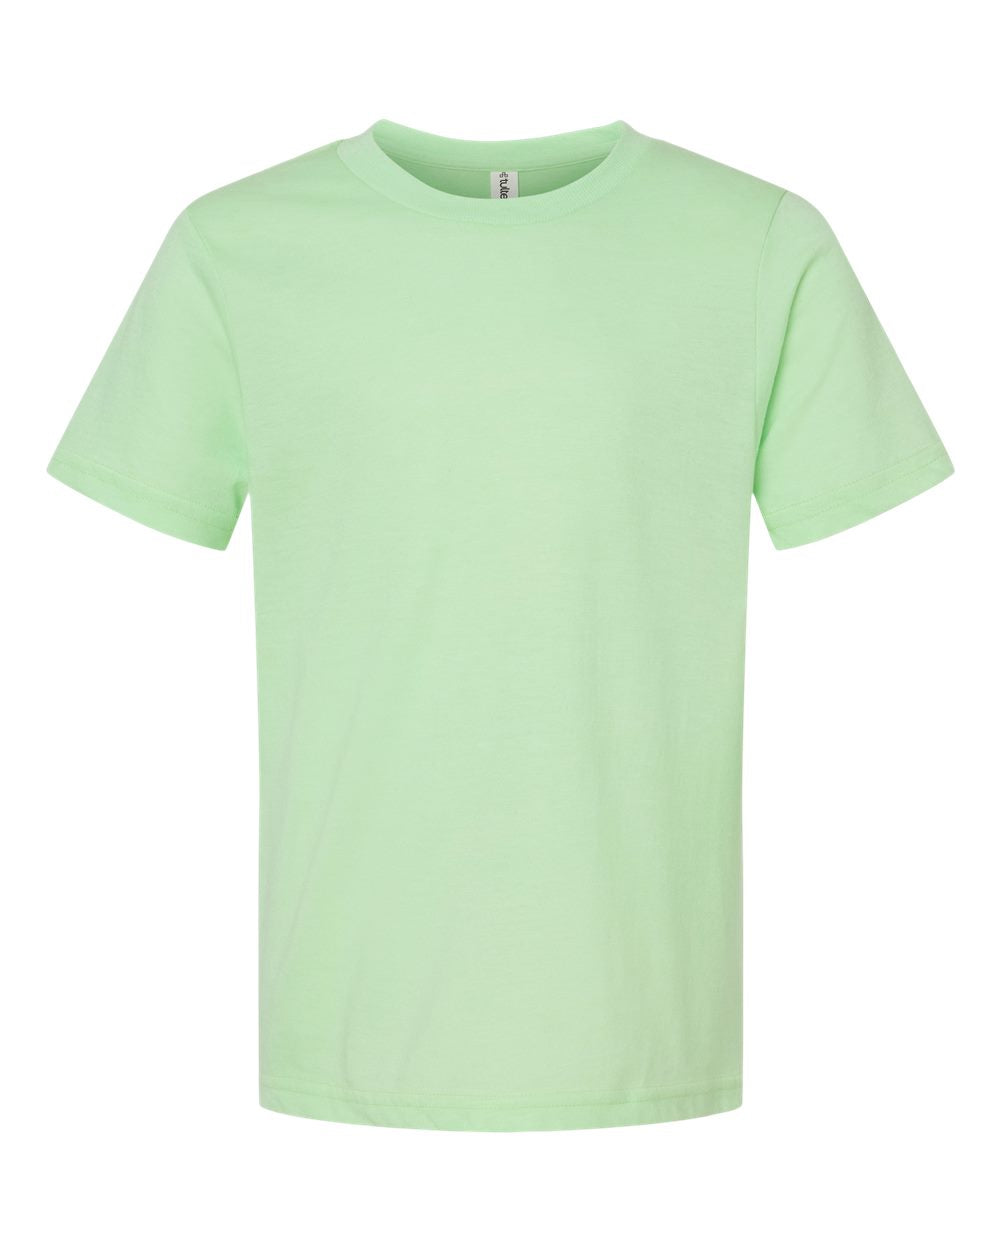 Tultex Youth Tee (235) in Heather Neo Mint